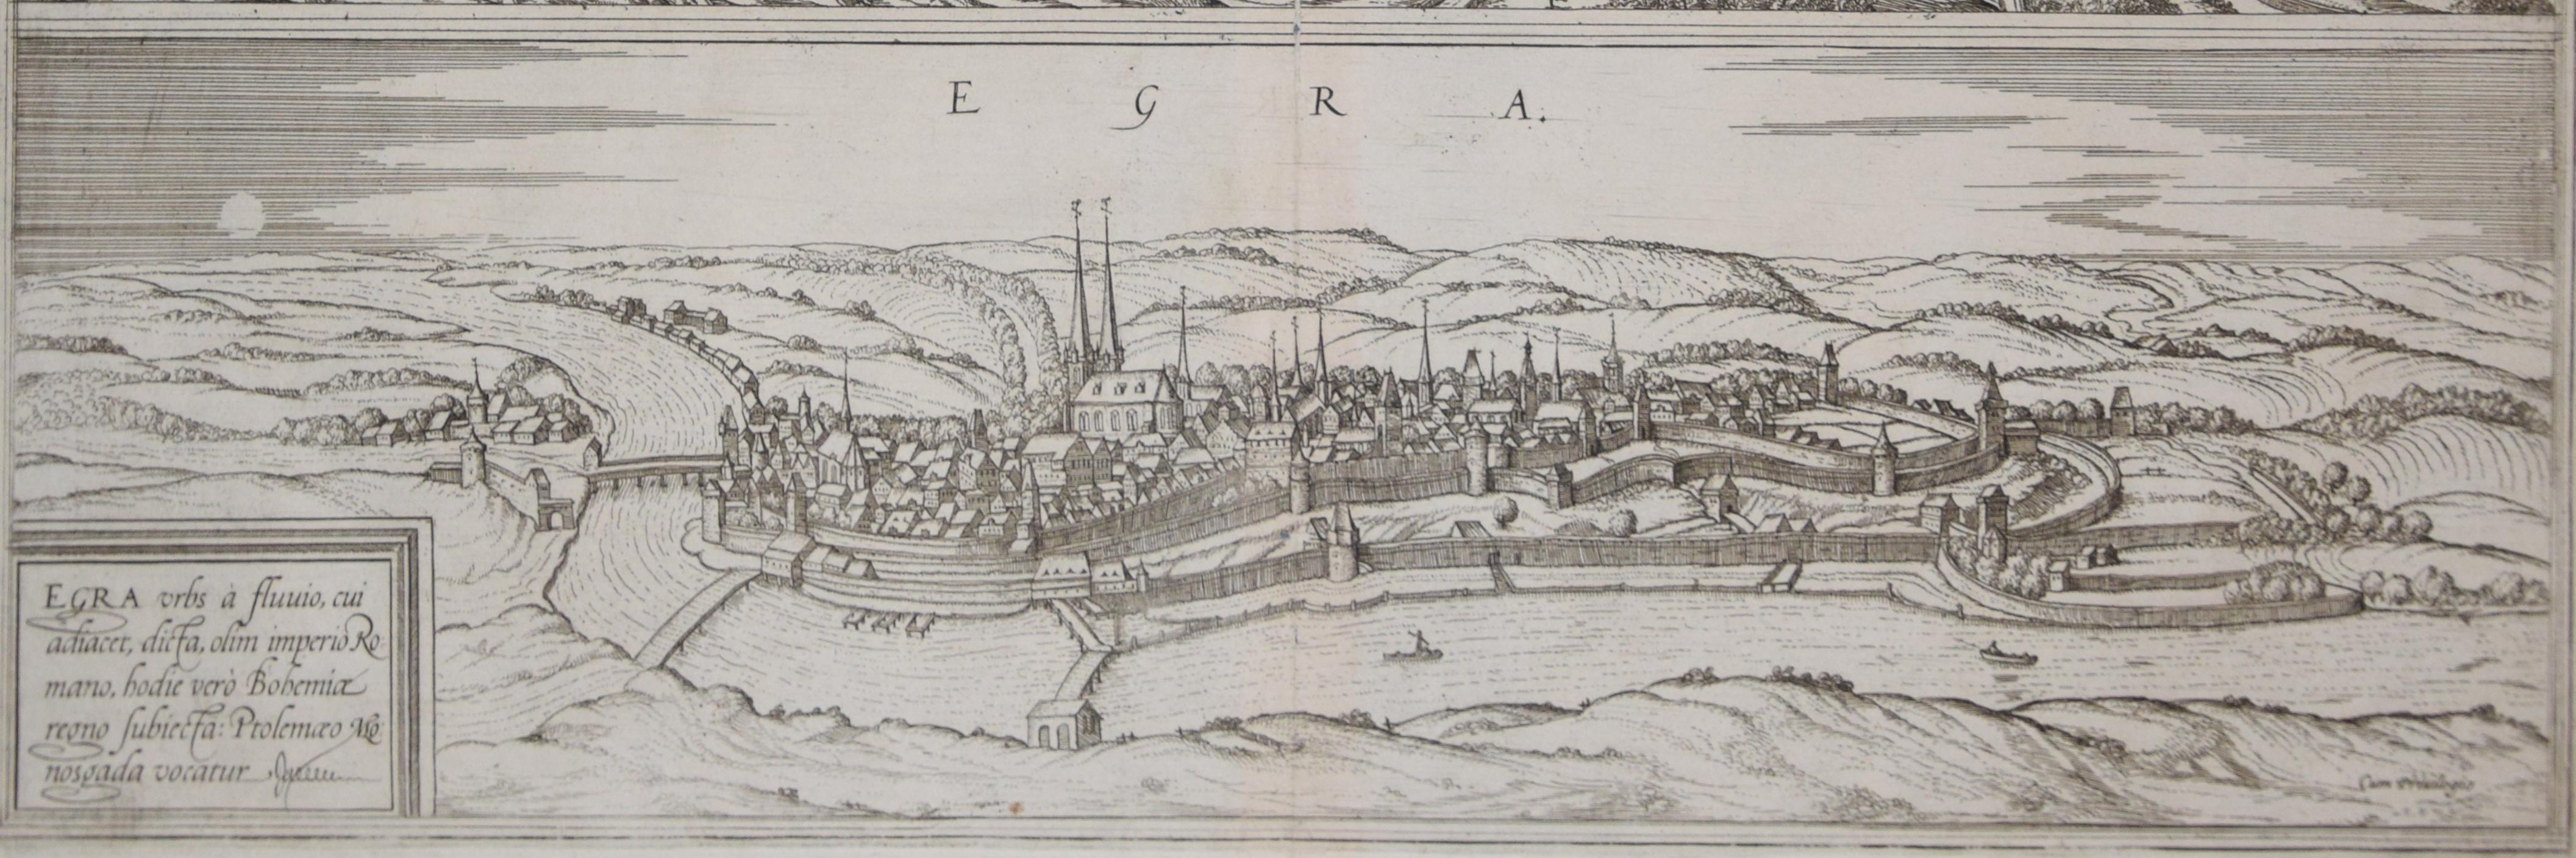 Prague and Egra, Antique Map from 